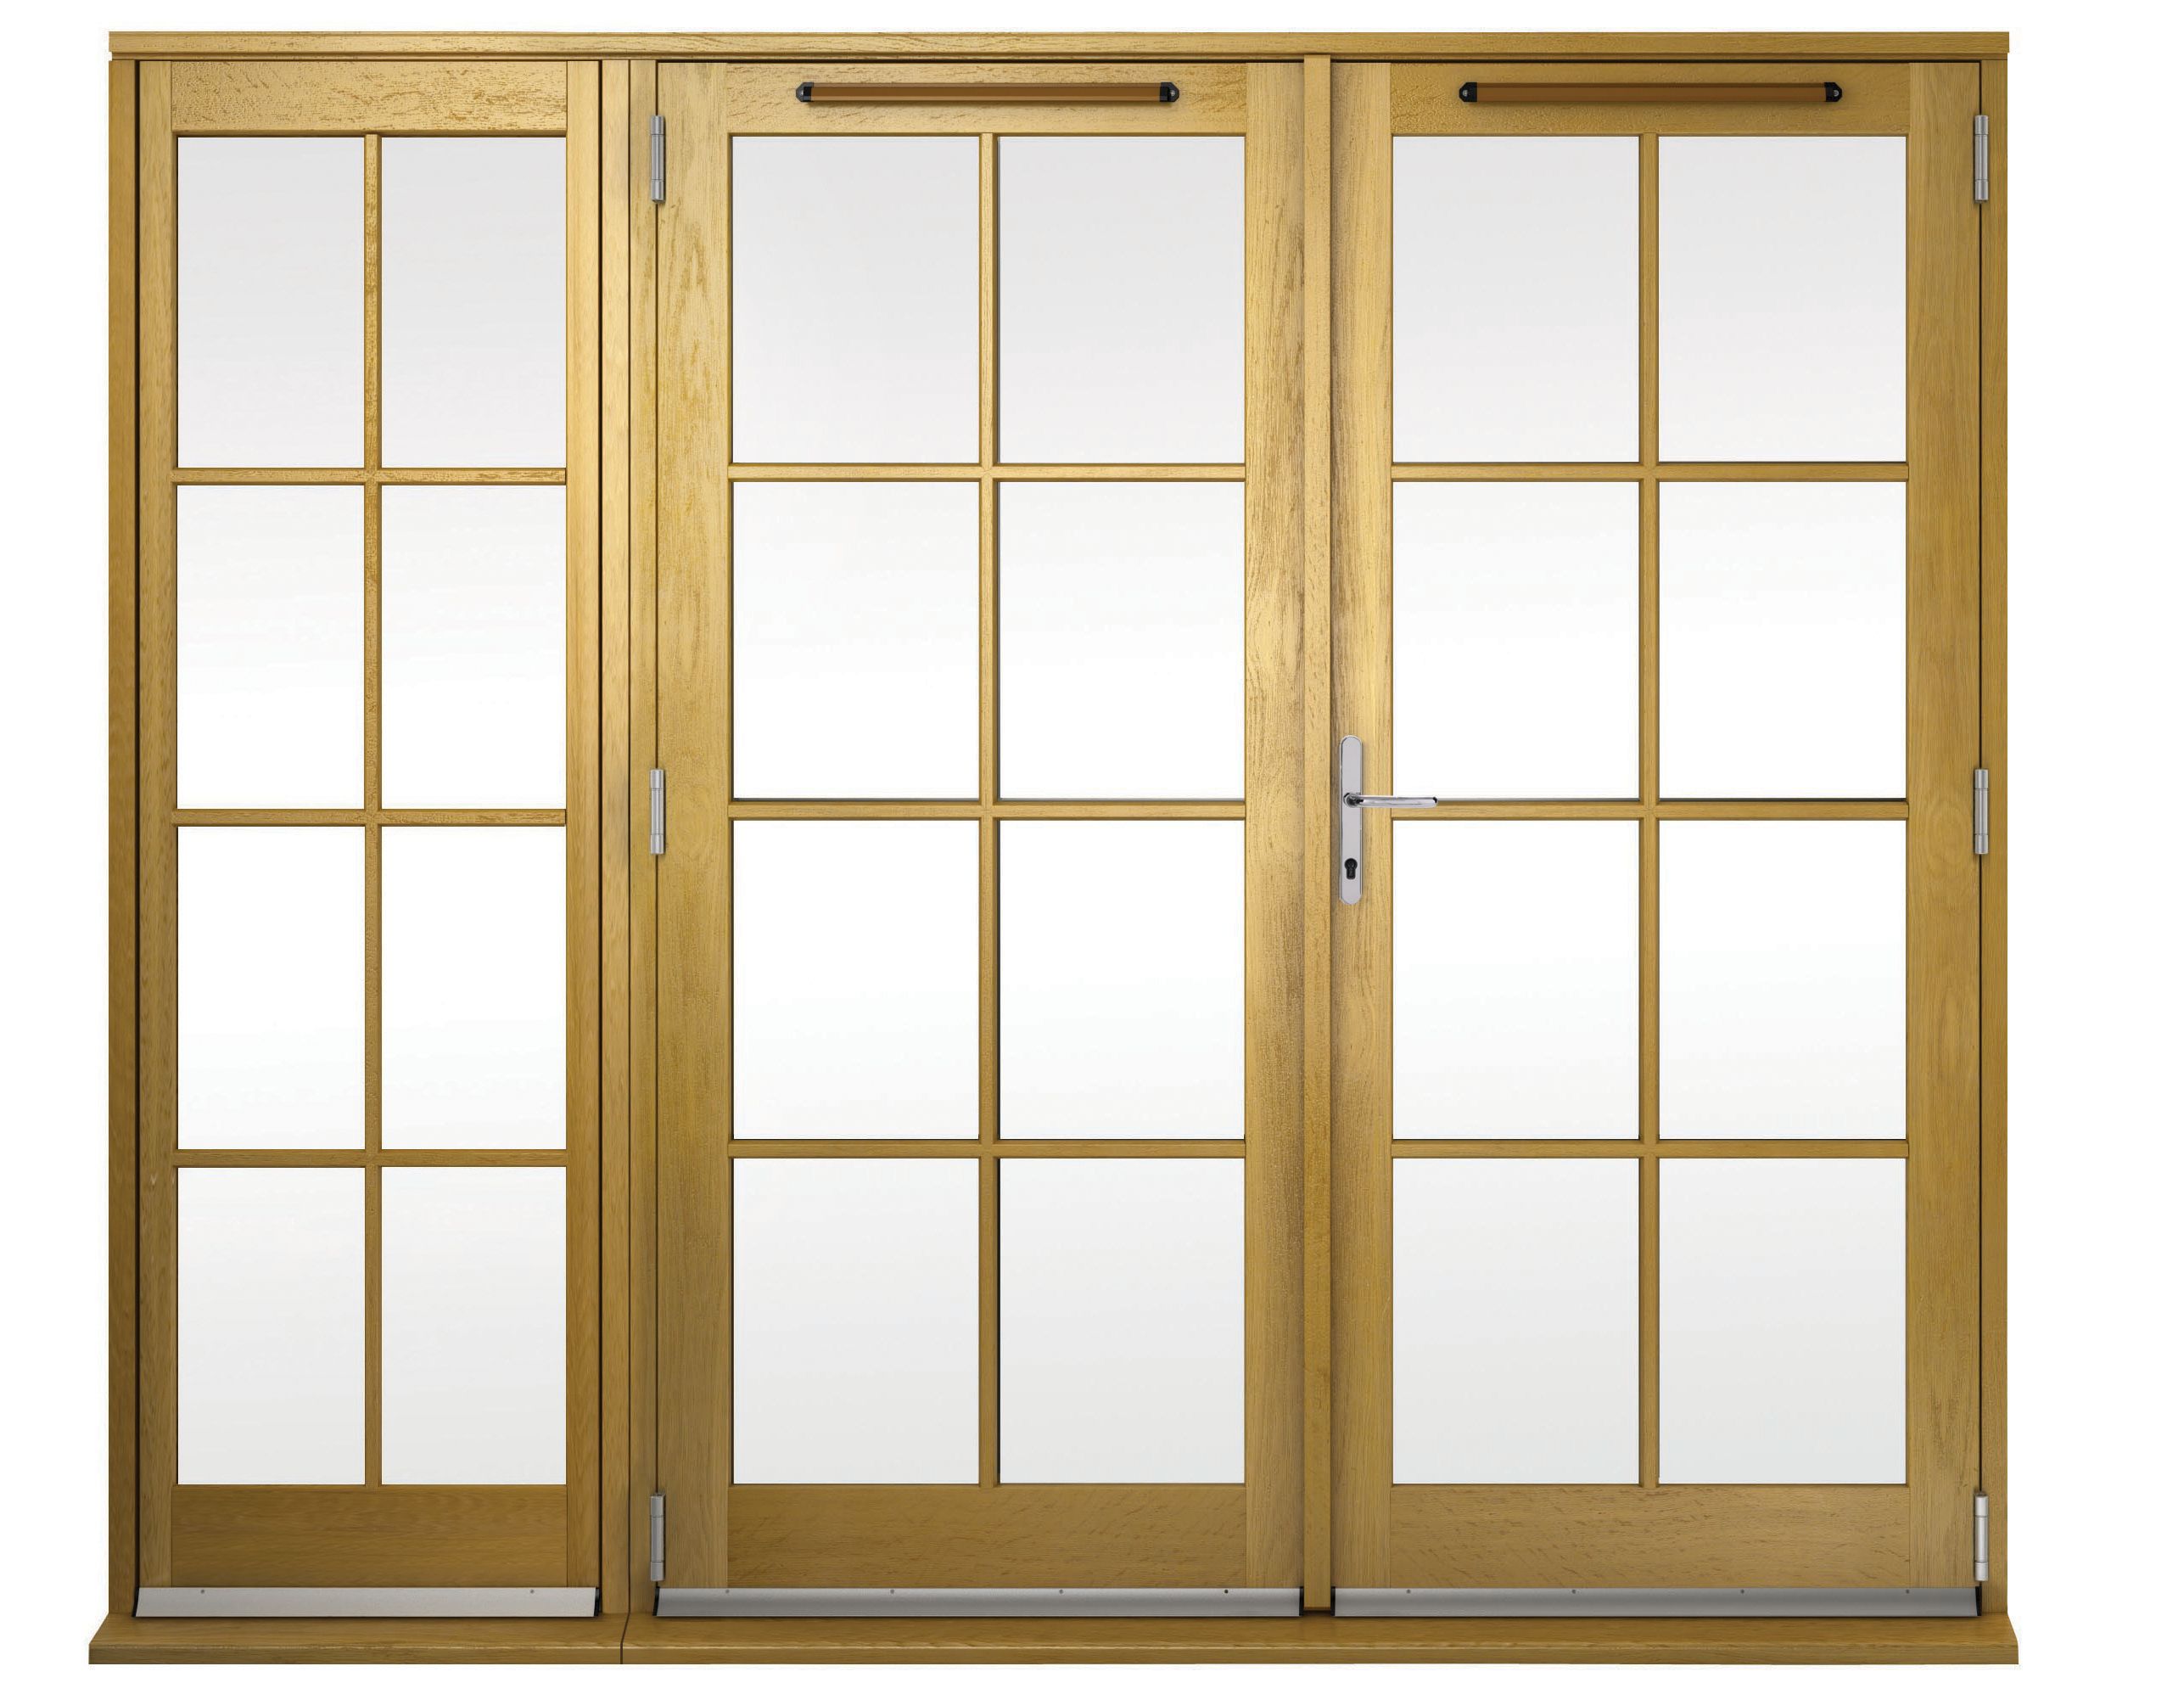 Image of Wickes Albery Georgian Bar Solid Oak Laminate French Doors 6ft with 1 Side Lites 600mm